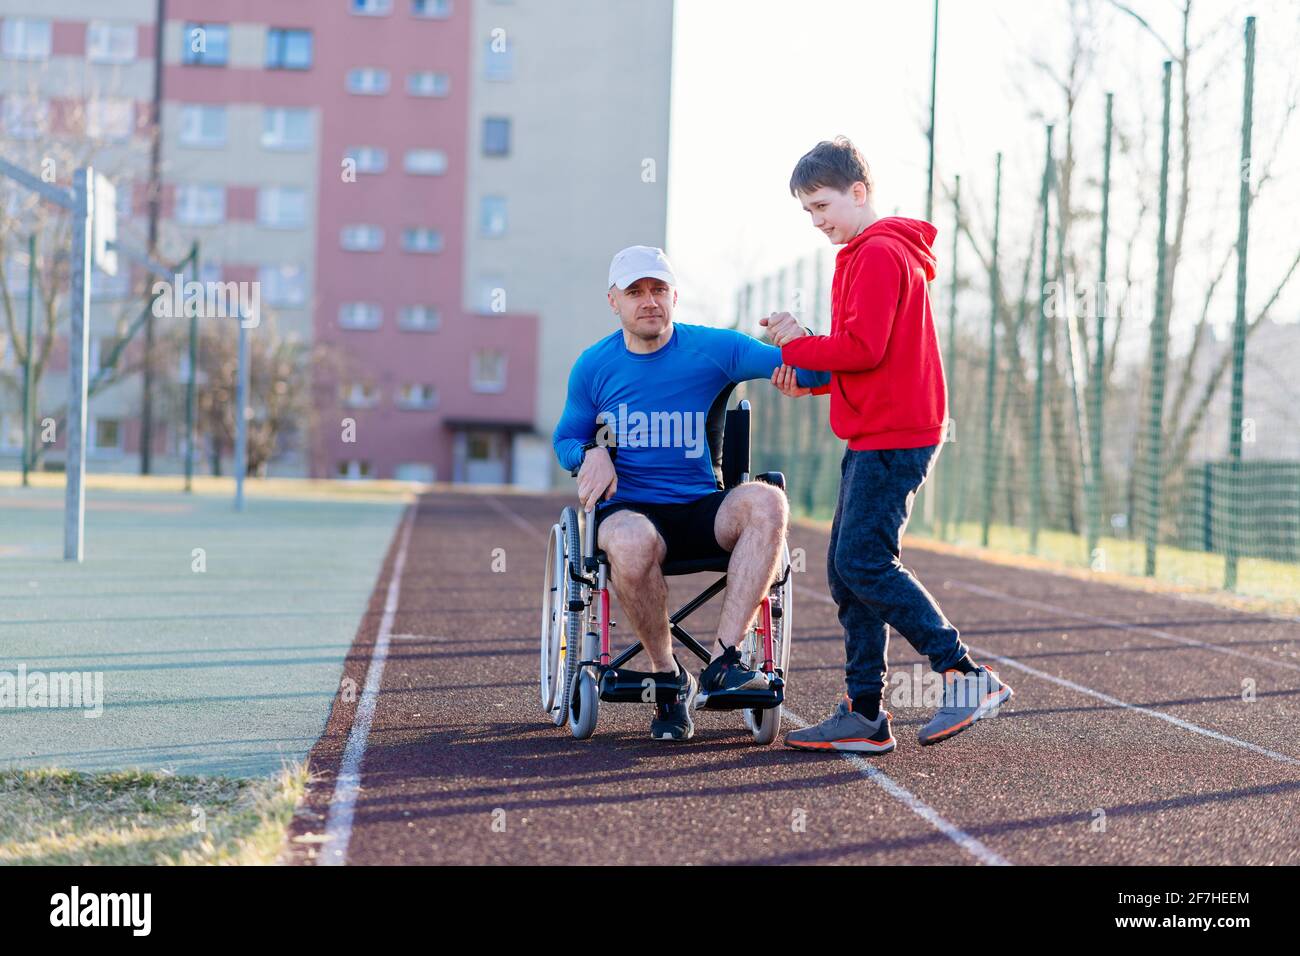 A teenage son helps his athlete father get up from his wheelchair on an athletics track. Stock Photo